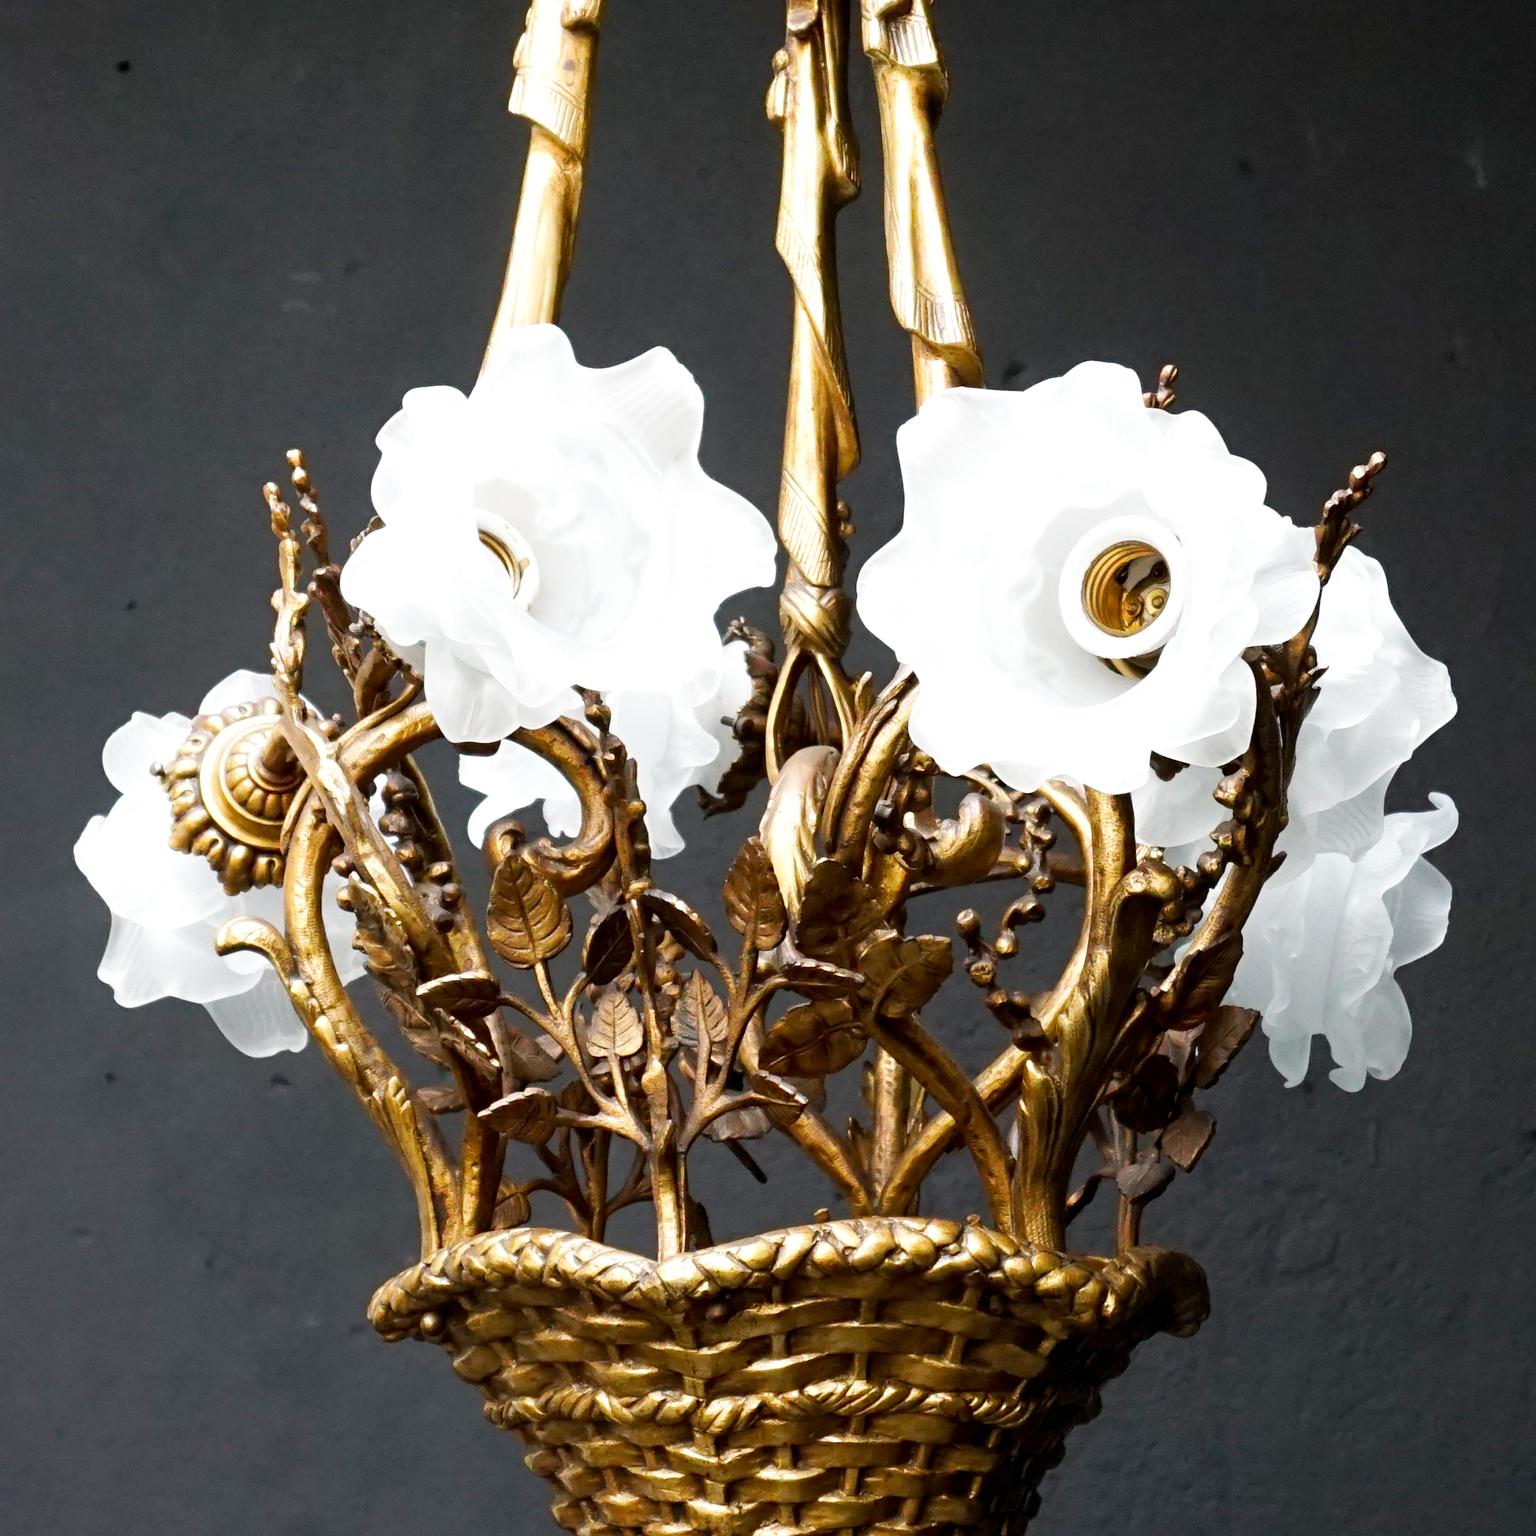 19th C. French Gilt Bronze Basket with Glass Roses, Marie Antoinette Chandelier For Sale 2